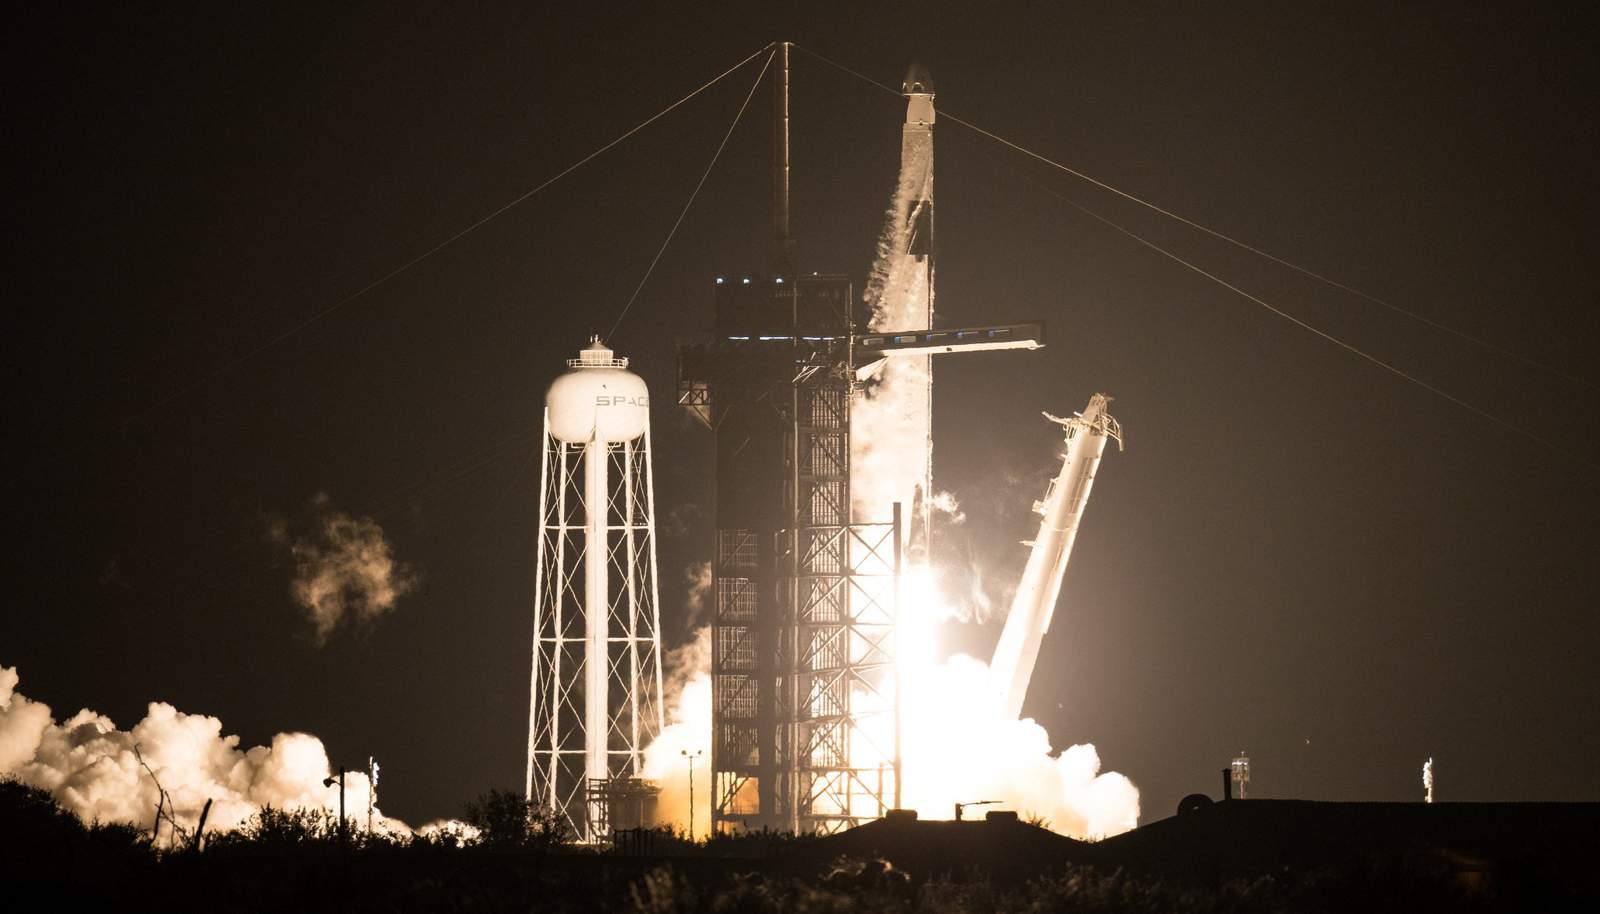 SpaceX launched Falcon 9 for Starlink mission in Florida